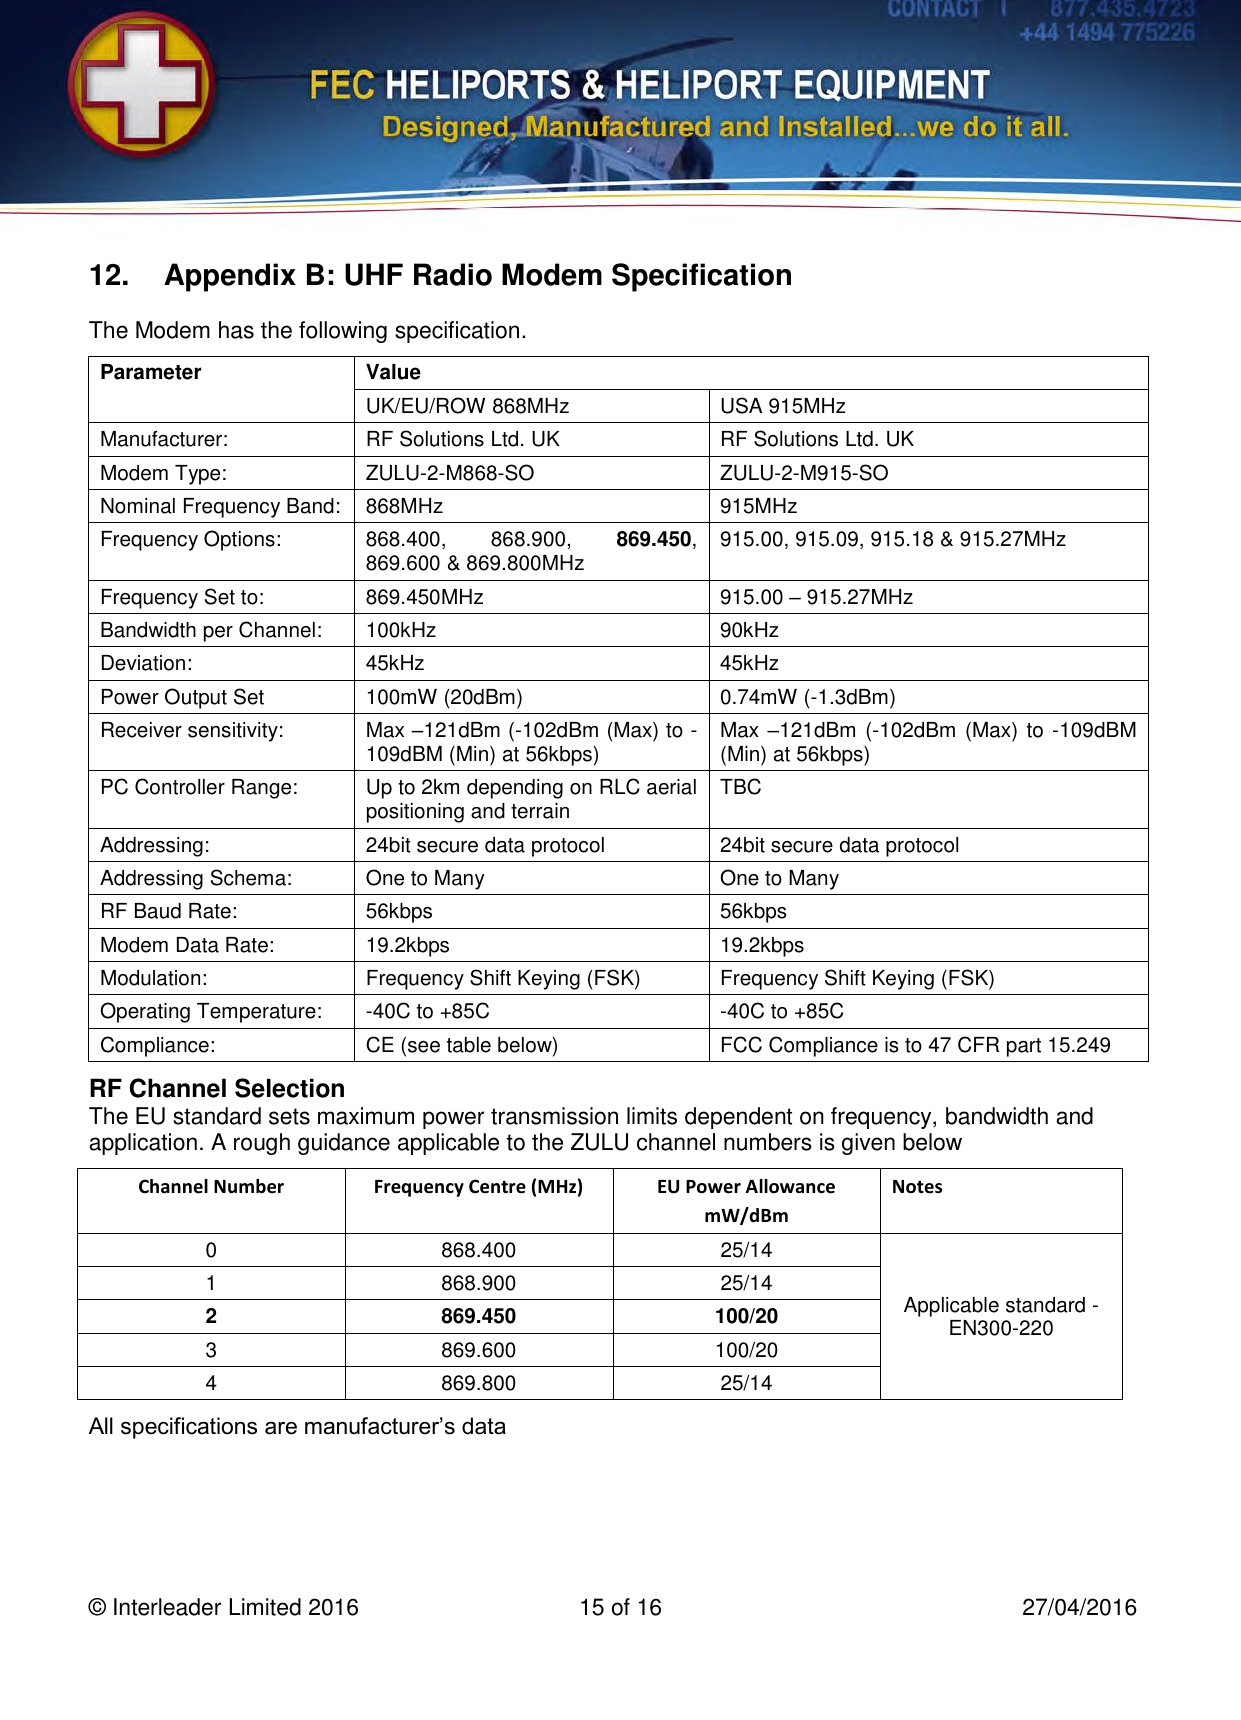    © Interleader Limited 2016  15 of 16  27/04/2016  12.  Appendix B: UHF Radio Modem Specification The Modem has the following specification. Parameter Value UK/EU/ROW 868MHz USA 915MHz Manufacturer: RF Solutions Ltd. UK RF Solutions Ltd. UK Modem Type: ZULU-2-M868-SO  ZULU-2-M915-SO  Nominal Frequency Band: 868MHz 915MHz Frequency Options: 868.400,  868.900,  869.450, 869.600 &amp; 869.800MHz 915.00, 915.09, 915.18 &amp; 915.27MHz Frequency Set to: 869.450MHz 915.00 – 915.27MHz Bandwidth per Channel: 100kHz 90kHz Deviation: 45kHz 45kHz Power Output Set 100mW (20dBm) 0.74mW (-1.3dBm) Receiver sensitivity: Max –121dBm (-102dBm (Max) to -109dBM (Min) at 56kbps) Max –121dBm (-102dBm (Max) to -109dBM (Min) at 56kbps) PC Controller Range: Up to 2km depending on RLC aerial positioning and terrain  TBC Addressing: 24bit secure data protocol 24bit secure data protocol Addressing Schema: One to Many One to Many RF Baud Rate:  56kbps 56kbps Modem Data Rate: 19.2kbps 19.2kbps Modulation: Frequency Shift Keying (FSK) Frequency Shift Keying (FSK) Operating Temperature: -40C to +85C -40C to +85C Compliance: CE (see table below) FCC Compliance is to 47 CFR part 15.249 RF Channel Selection The EU standard sets maximum power transmission limits dependent on frequency, bandwidth and application. A rough guidance applicable to the ZULU channel numbers is given below  Channel Number Frequency Centre (MHz) EU Power Allowance mW/dBm Notes 0 868.400 25/14 Applicable standard - EN300-220 1 868.900 25/14 2 869.450 100/20 3 869.600 100/20 4 869.800 25/14 All specifications are manufacturer’s data    